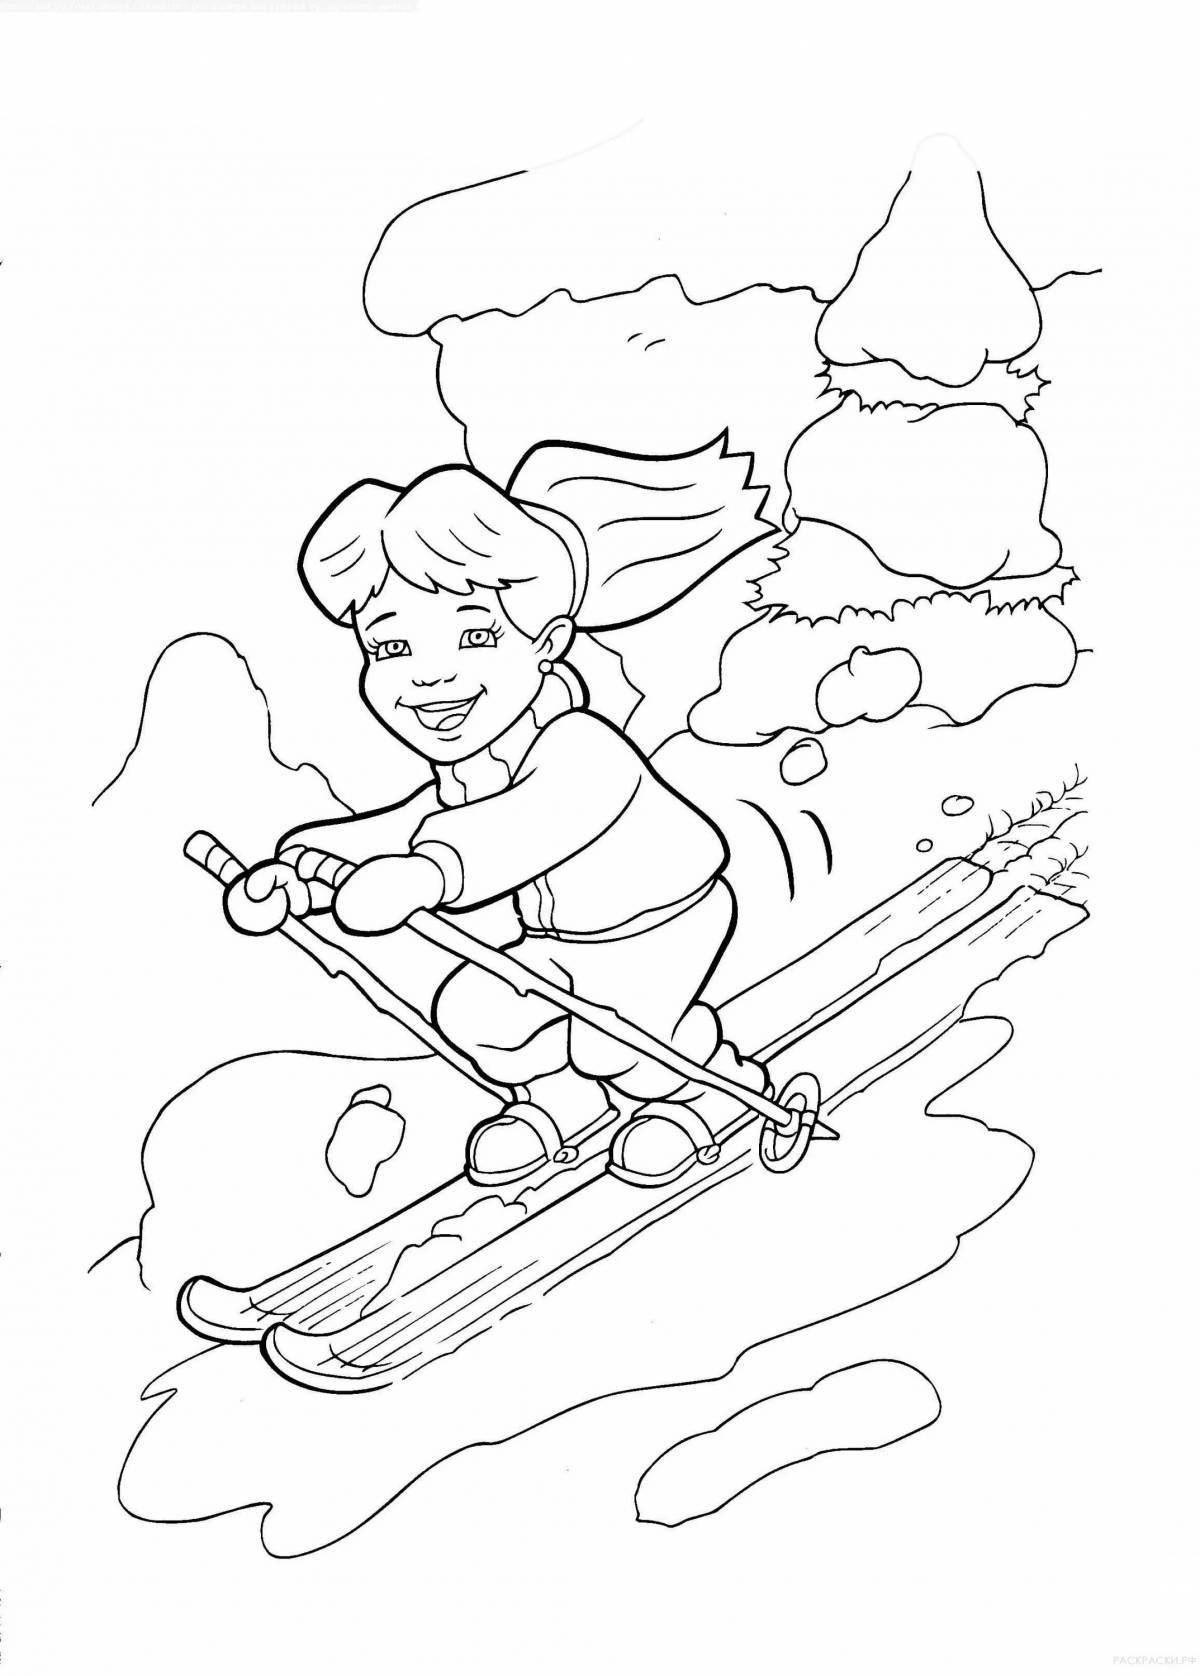 Animated skier coloring book for kids